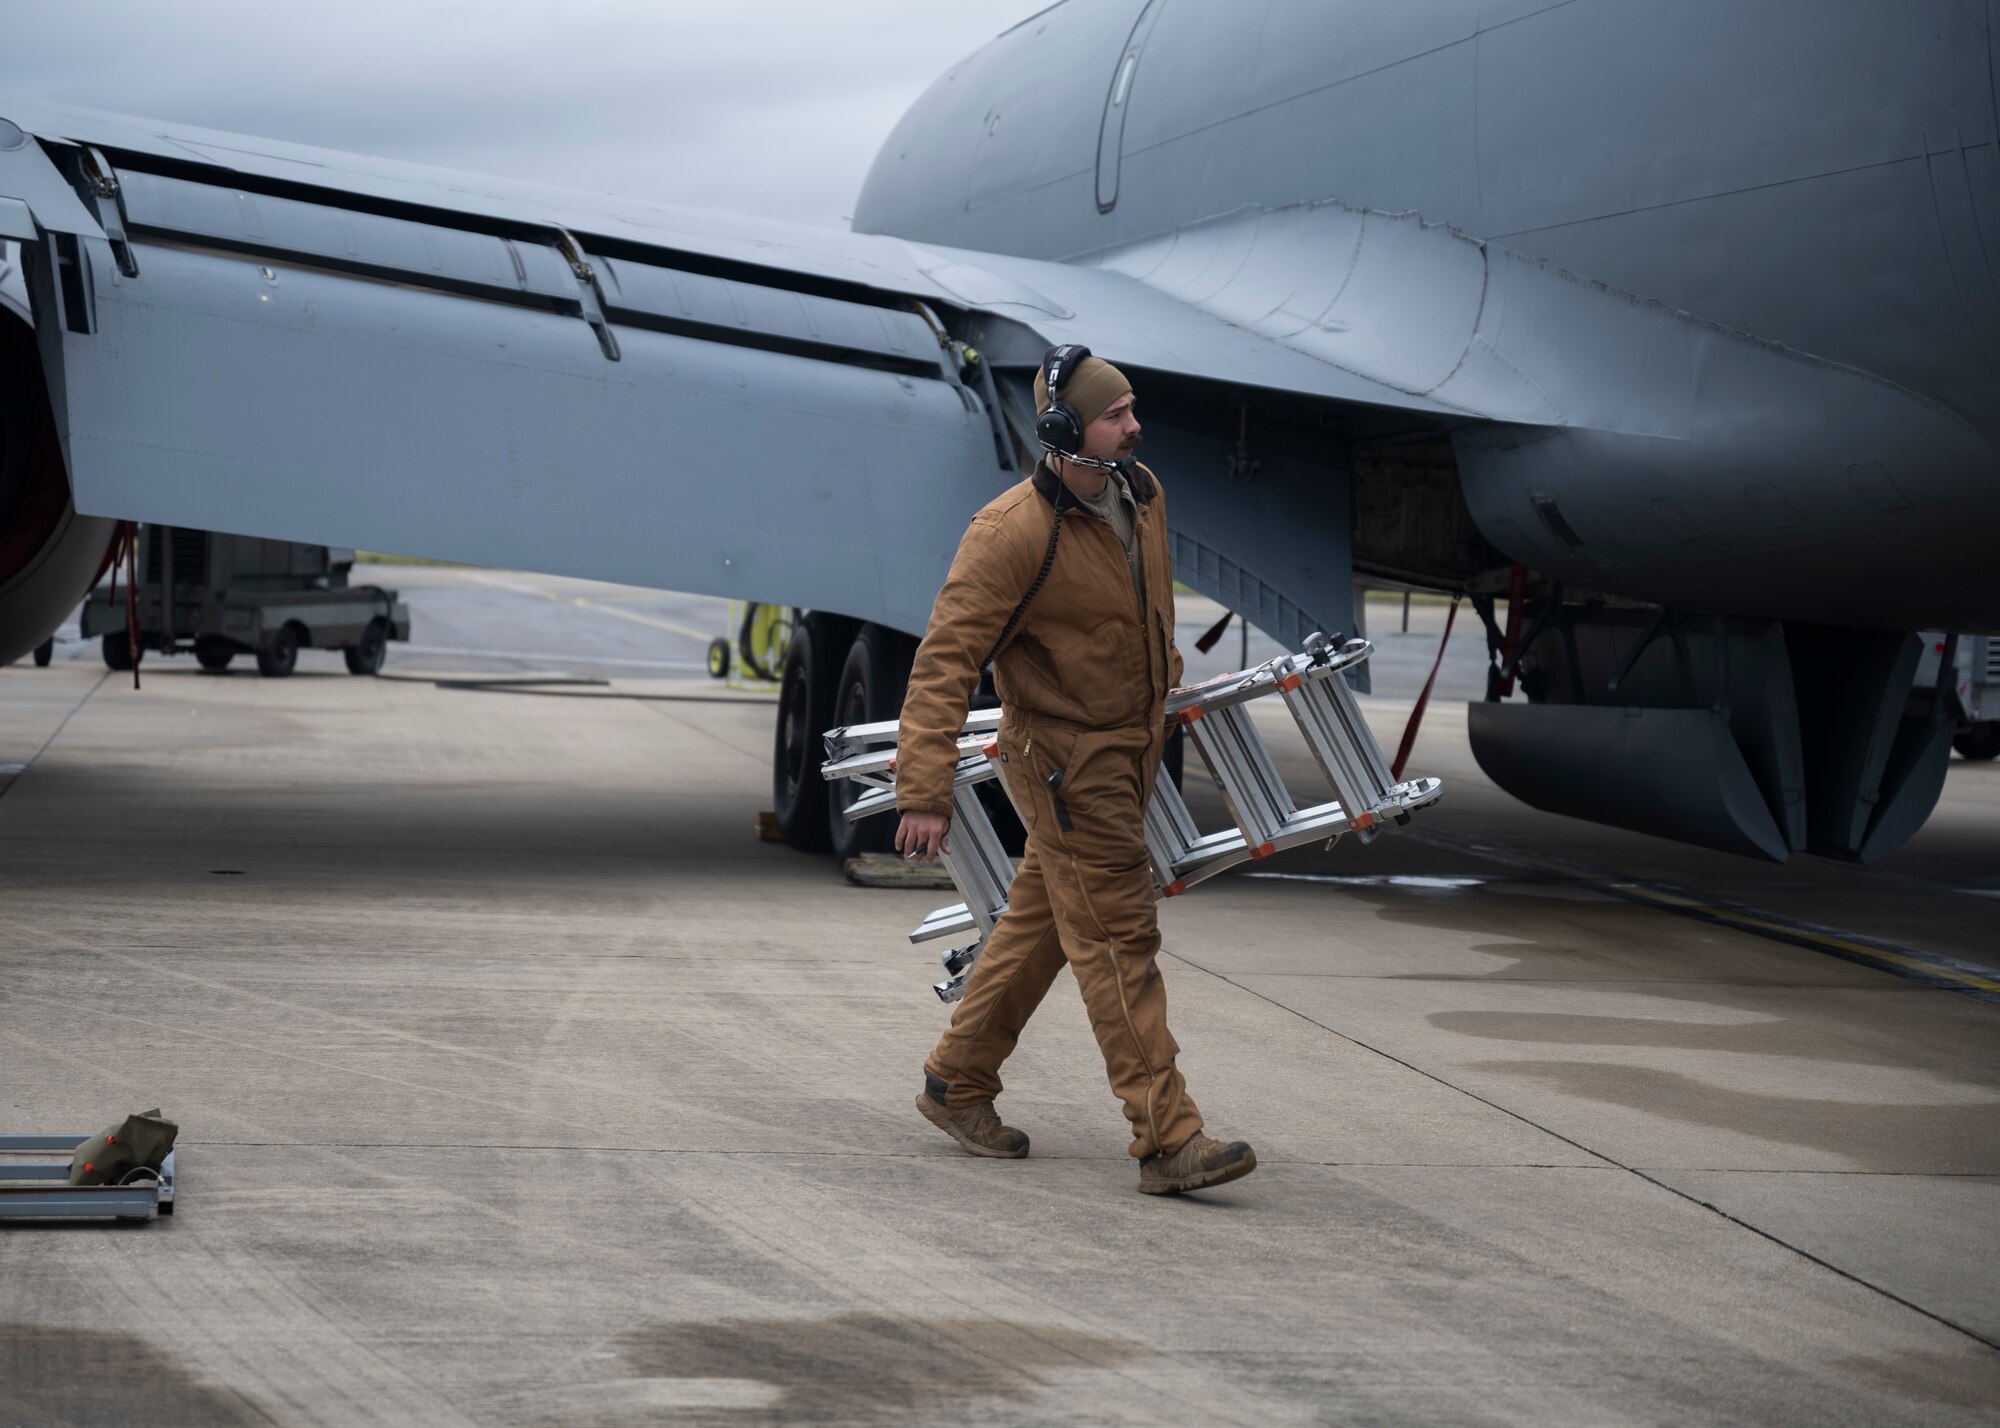 The 100th AMXS ensures the KC-135 is able to provide rapid global mobility and aerial refueling capability to the U.S. Air Force and NATO partners and allies.